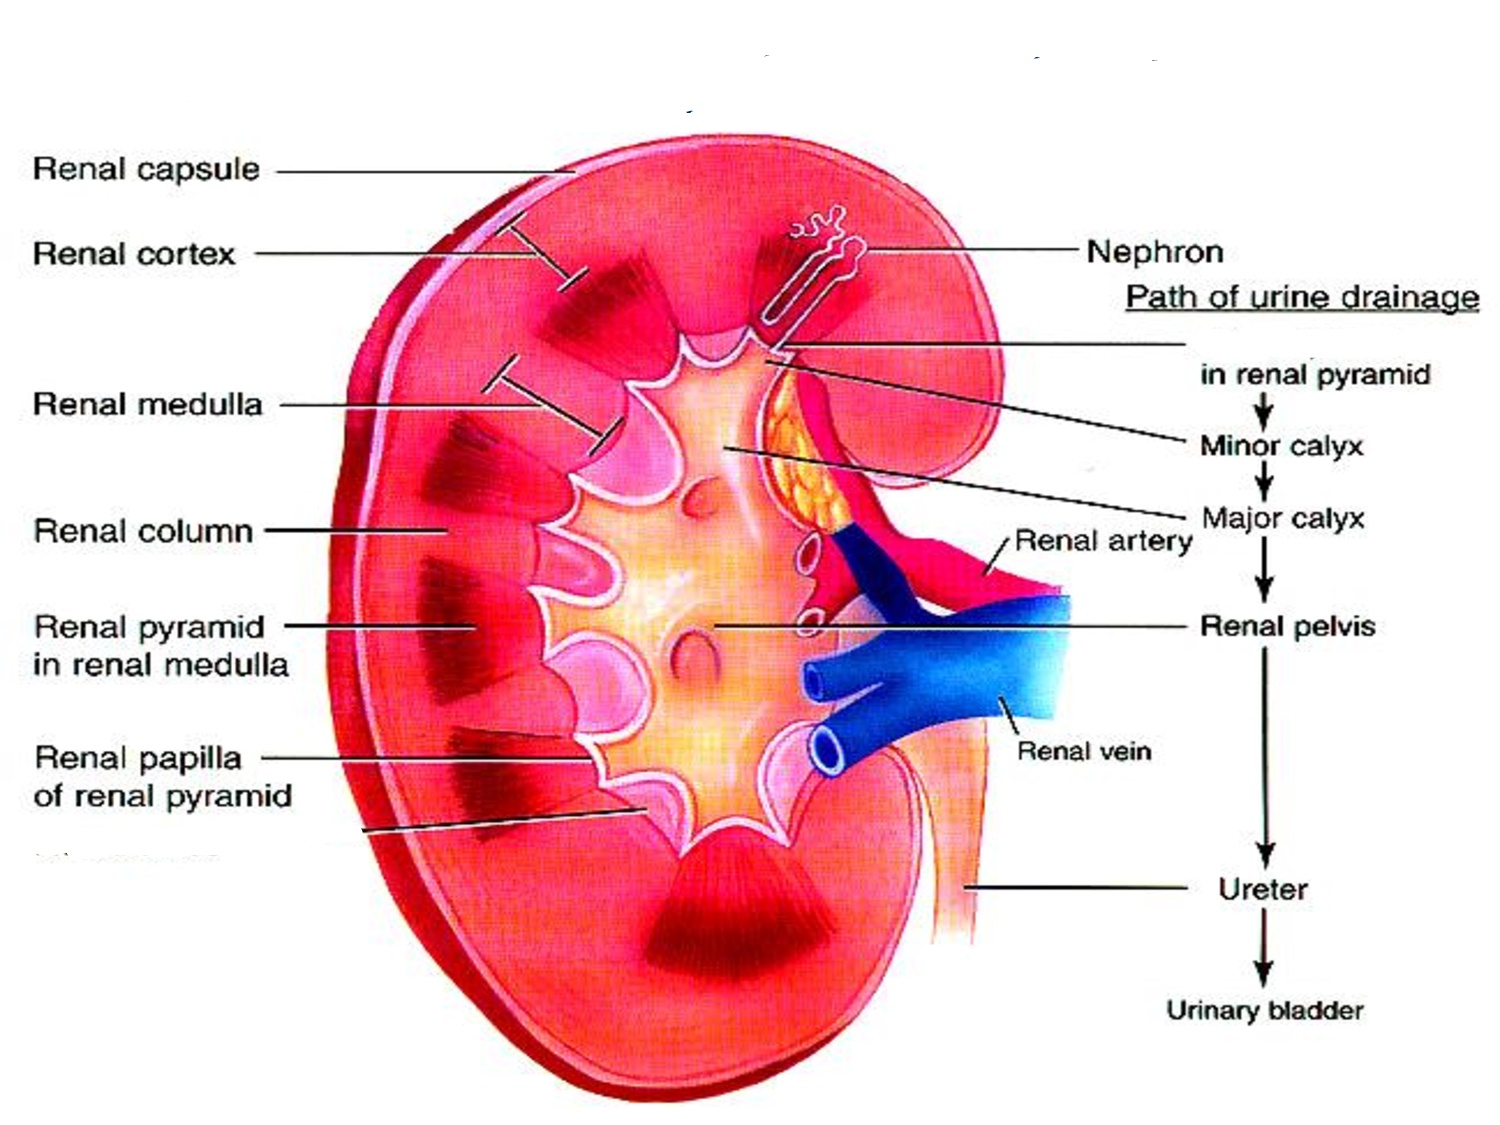 assignment on kidney